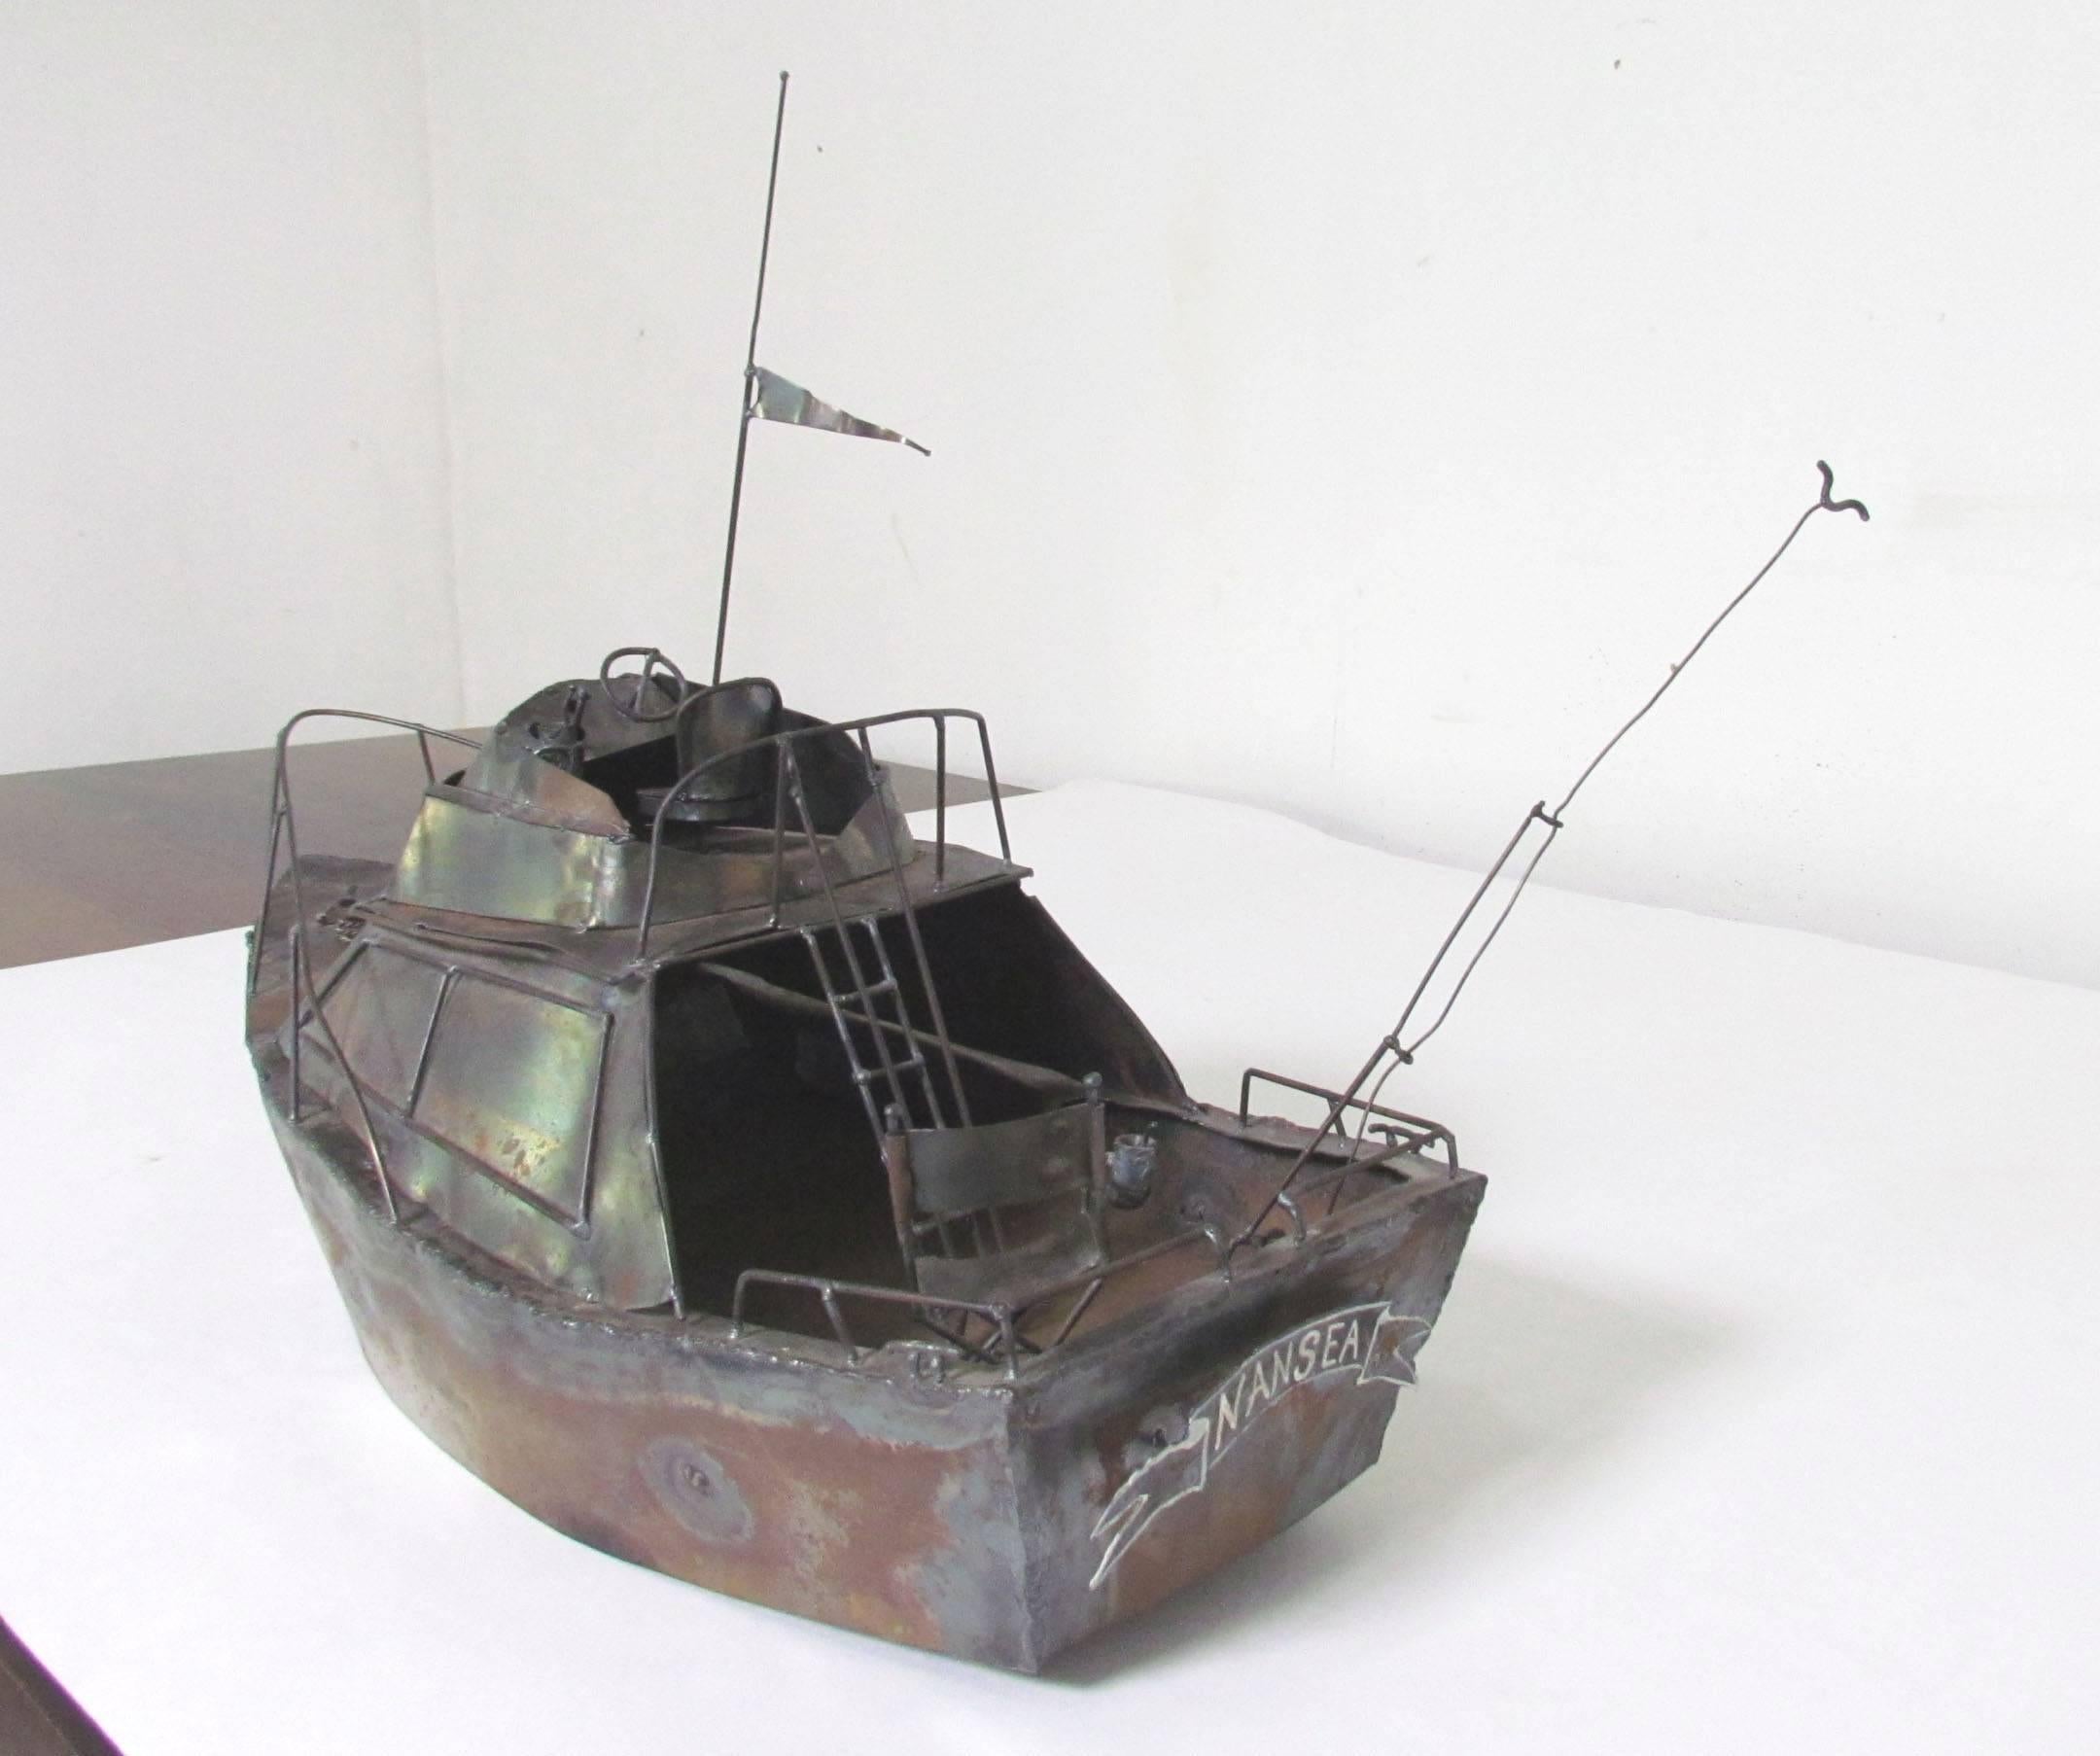 Charming metal fabricated sculpture of a charter fishing boat the 